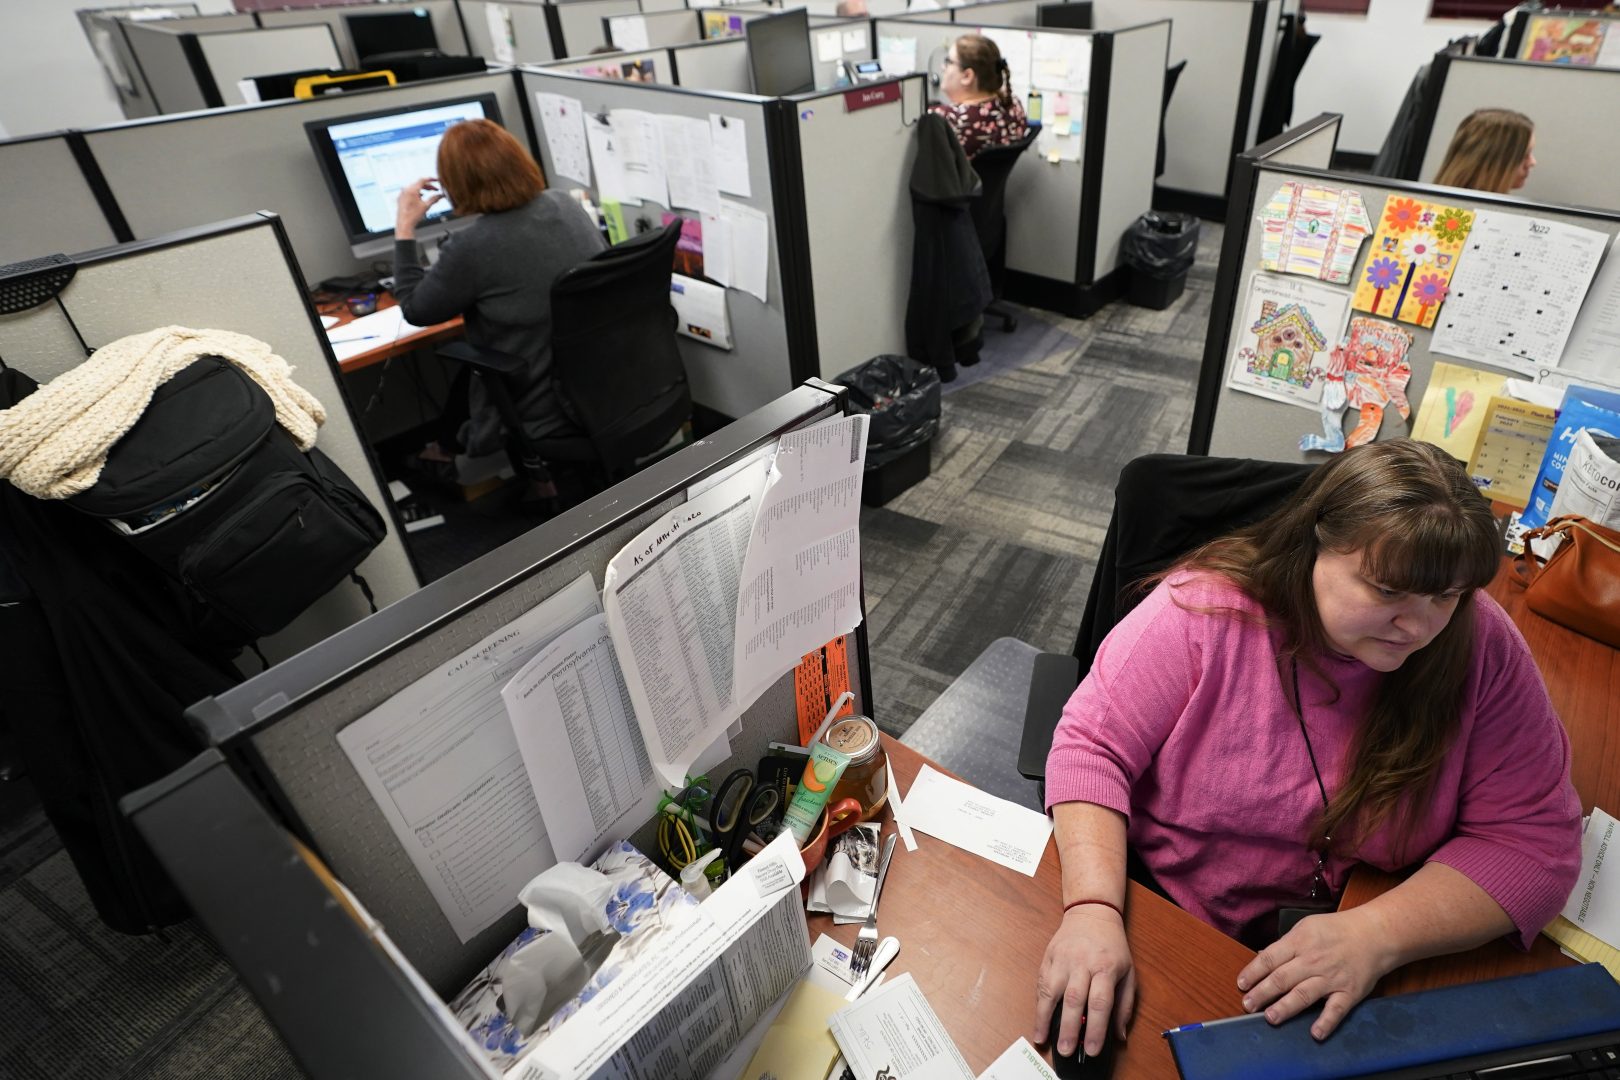 Workers field calls at an intake call screening center for the Allegheny County Children and Youth Services office in Penn Hills, Pa. on Thursday, Feb. 17, 2022.  